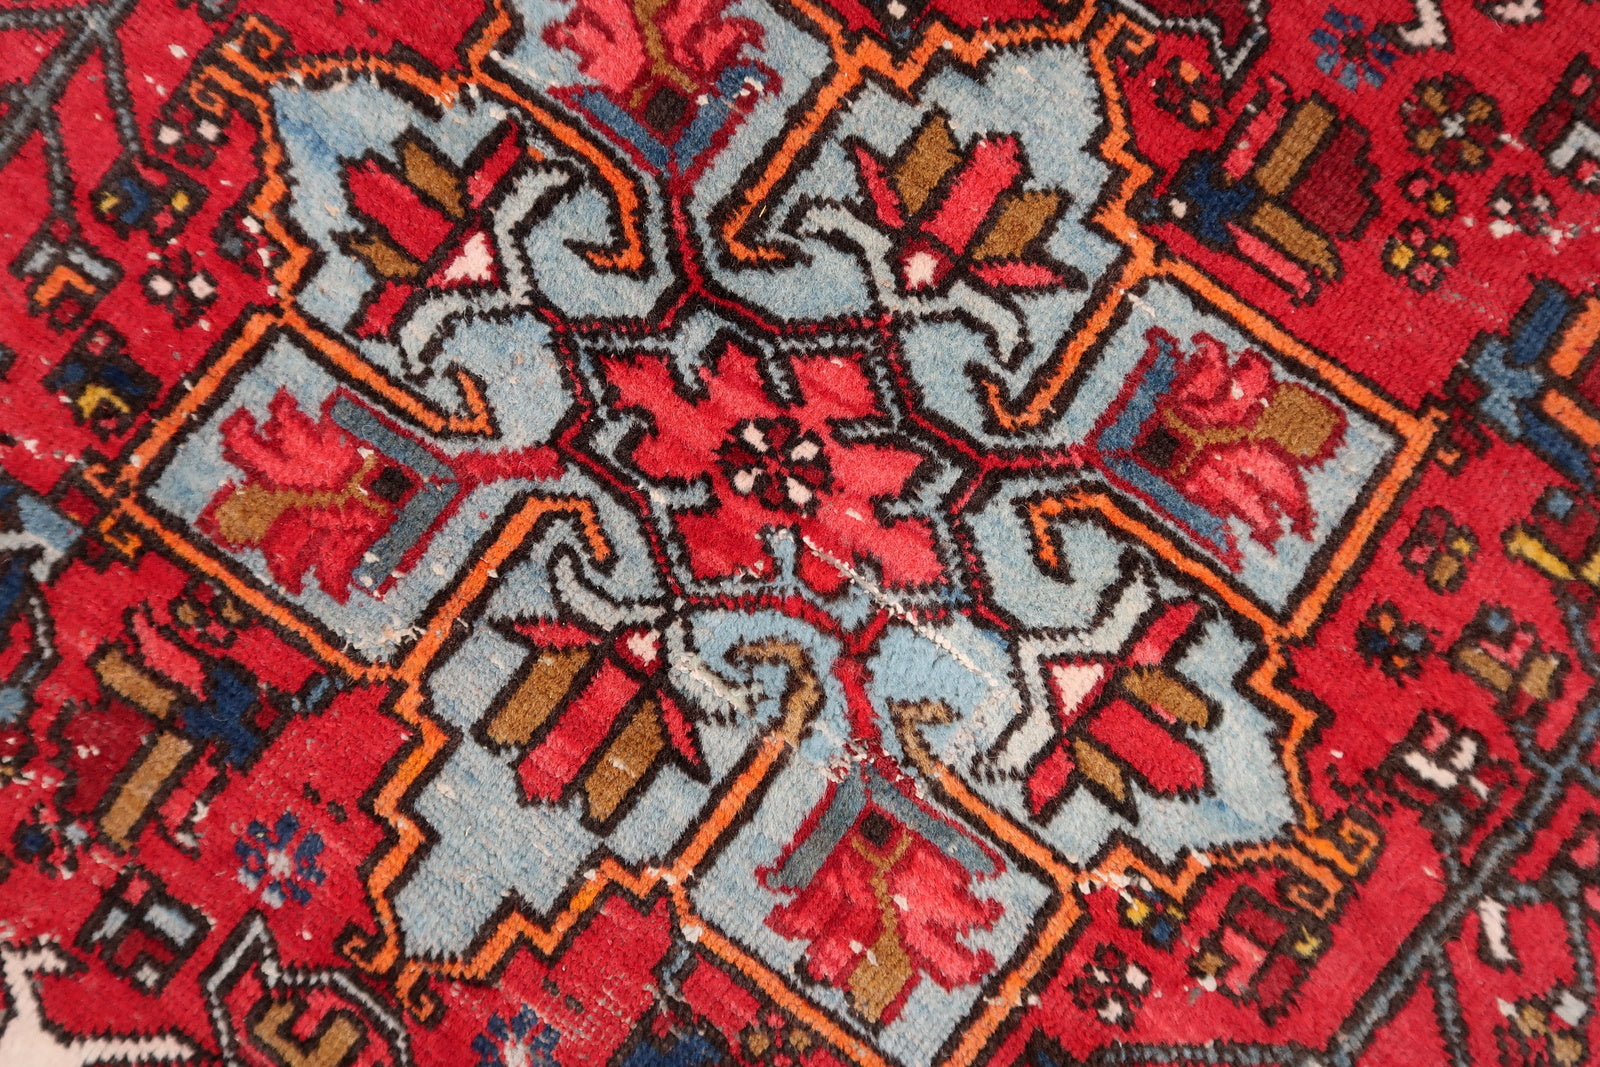 Complementary Shades of Blue, White, and Brown Creating Visual Contrast on Vintage Wool Rug - 1920s